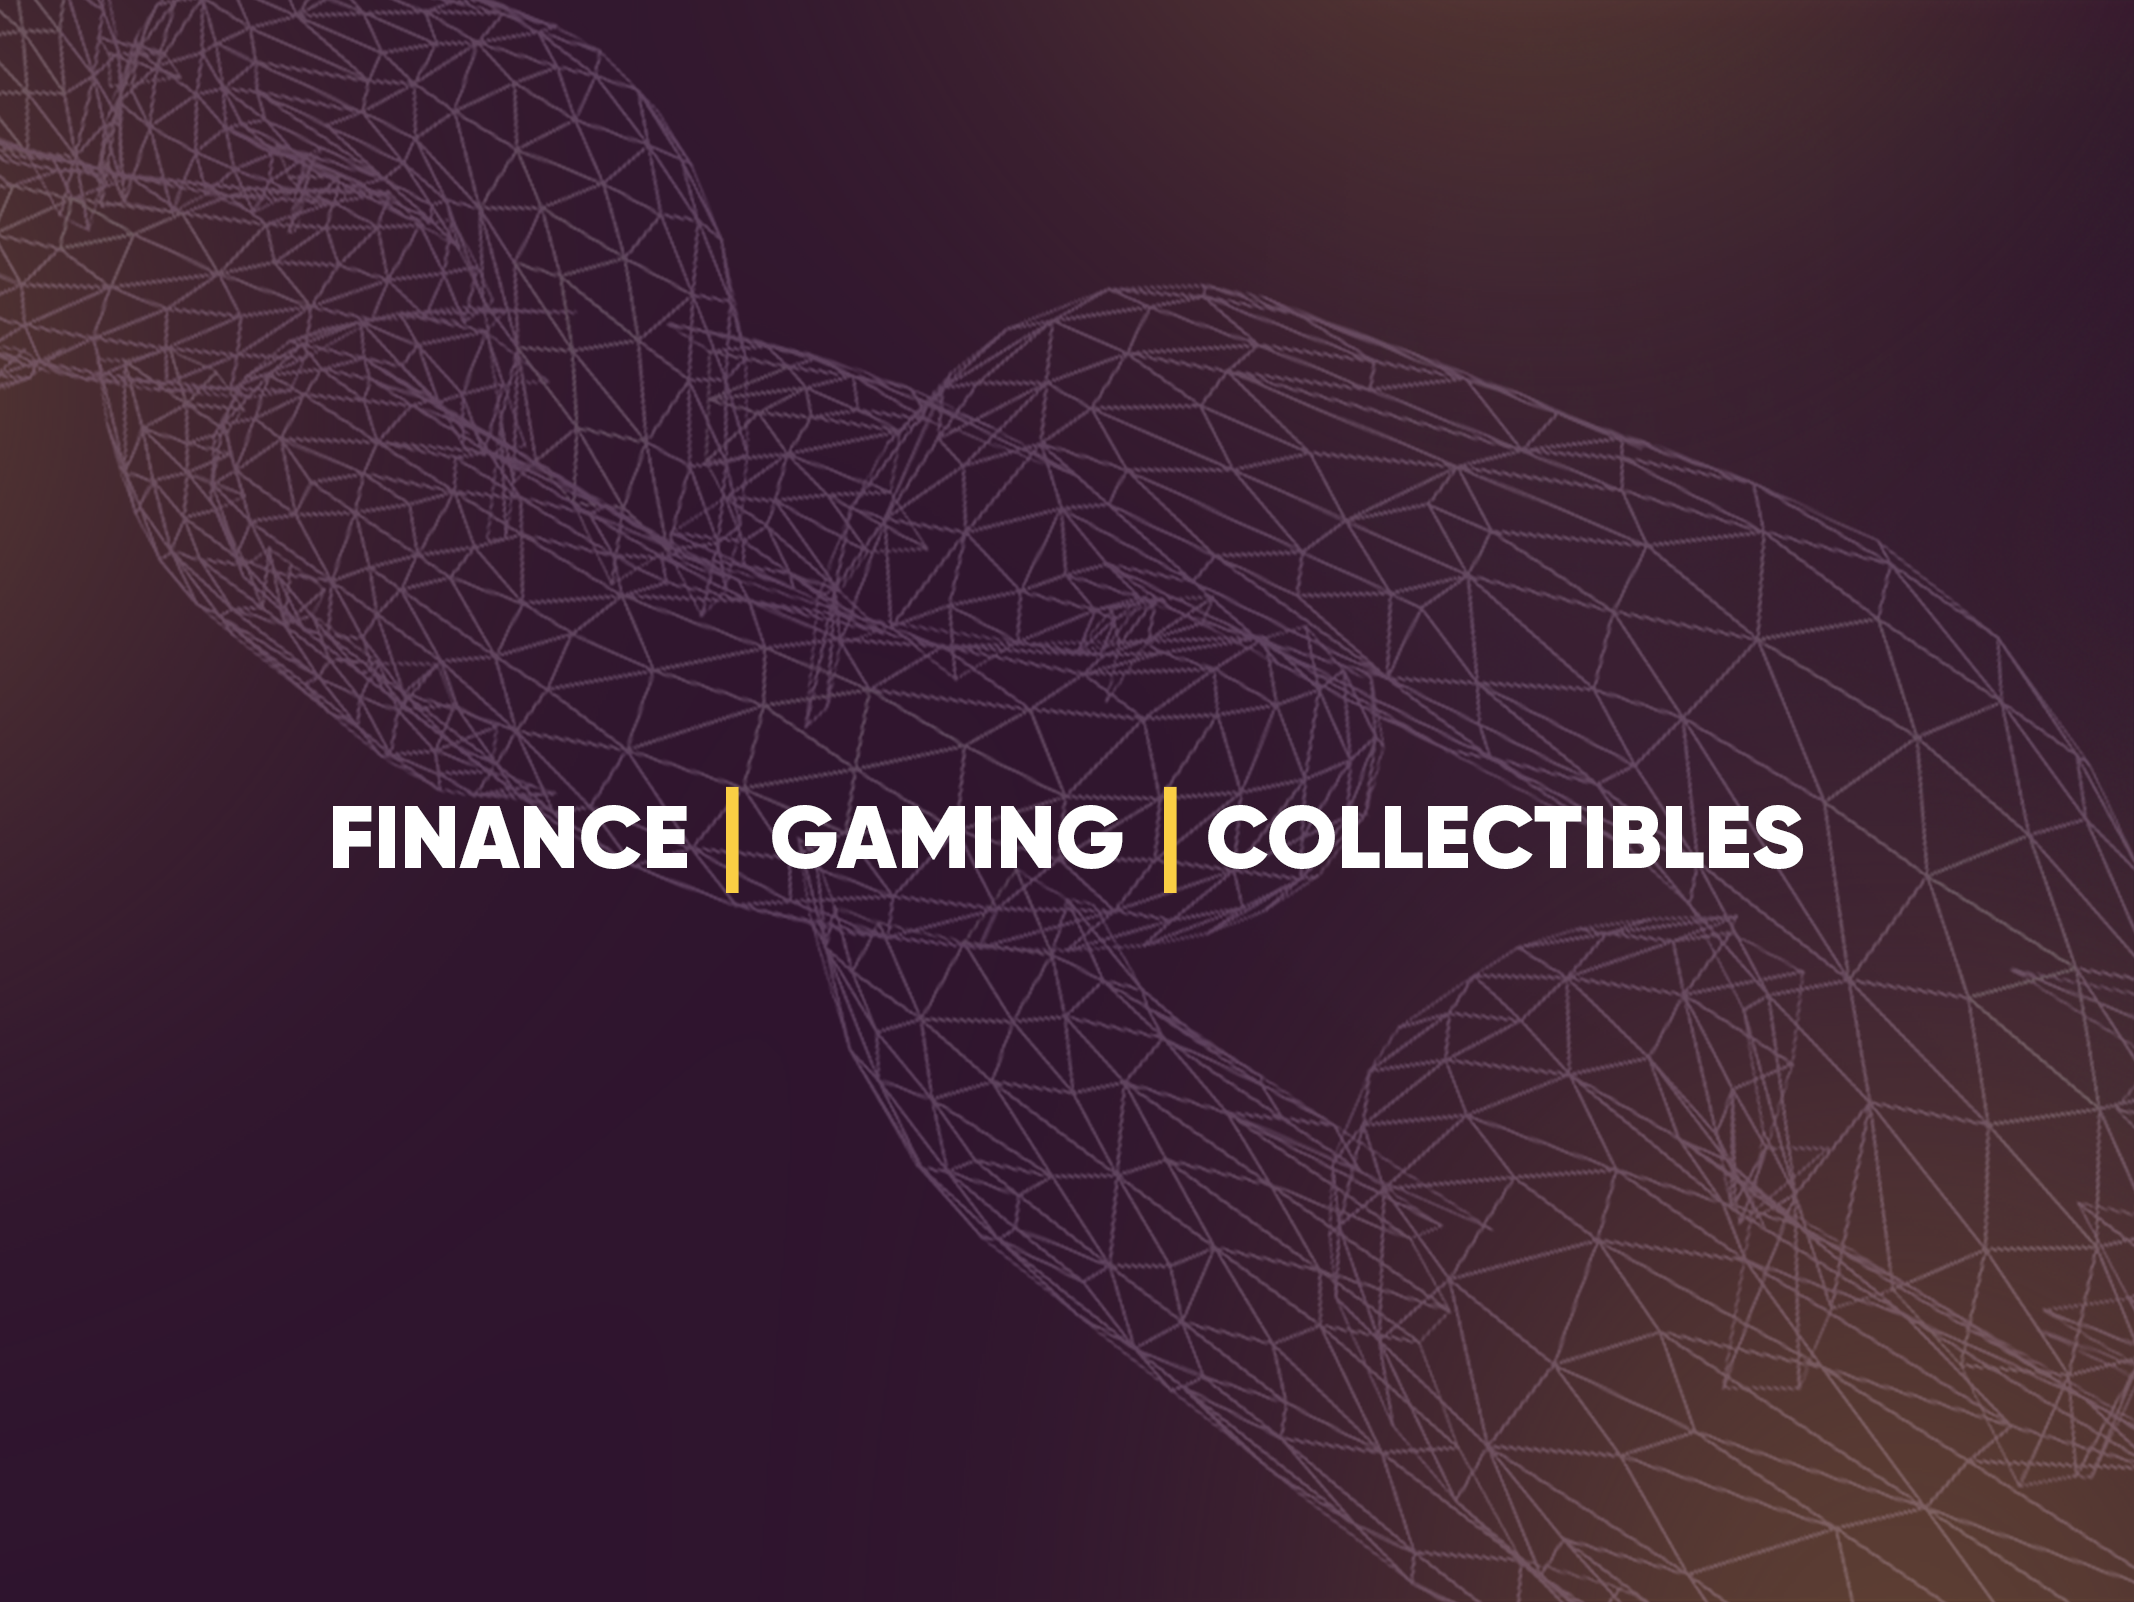 Web 3.0 gaming finance collectables